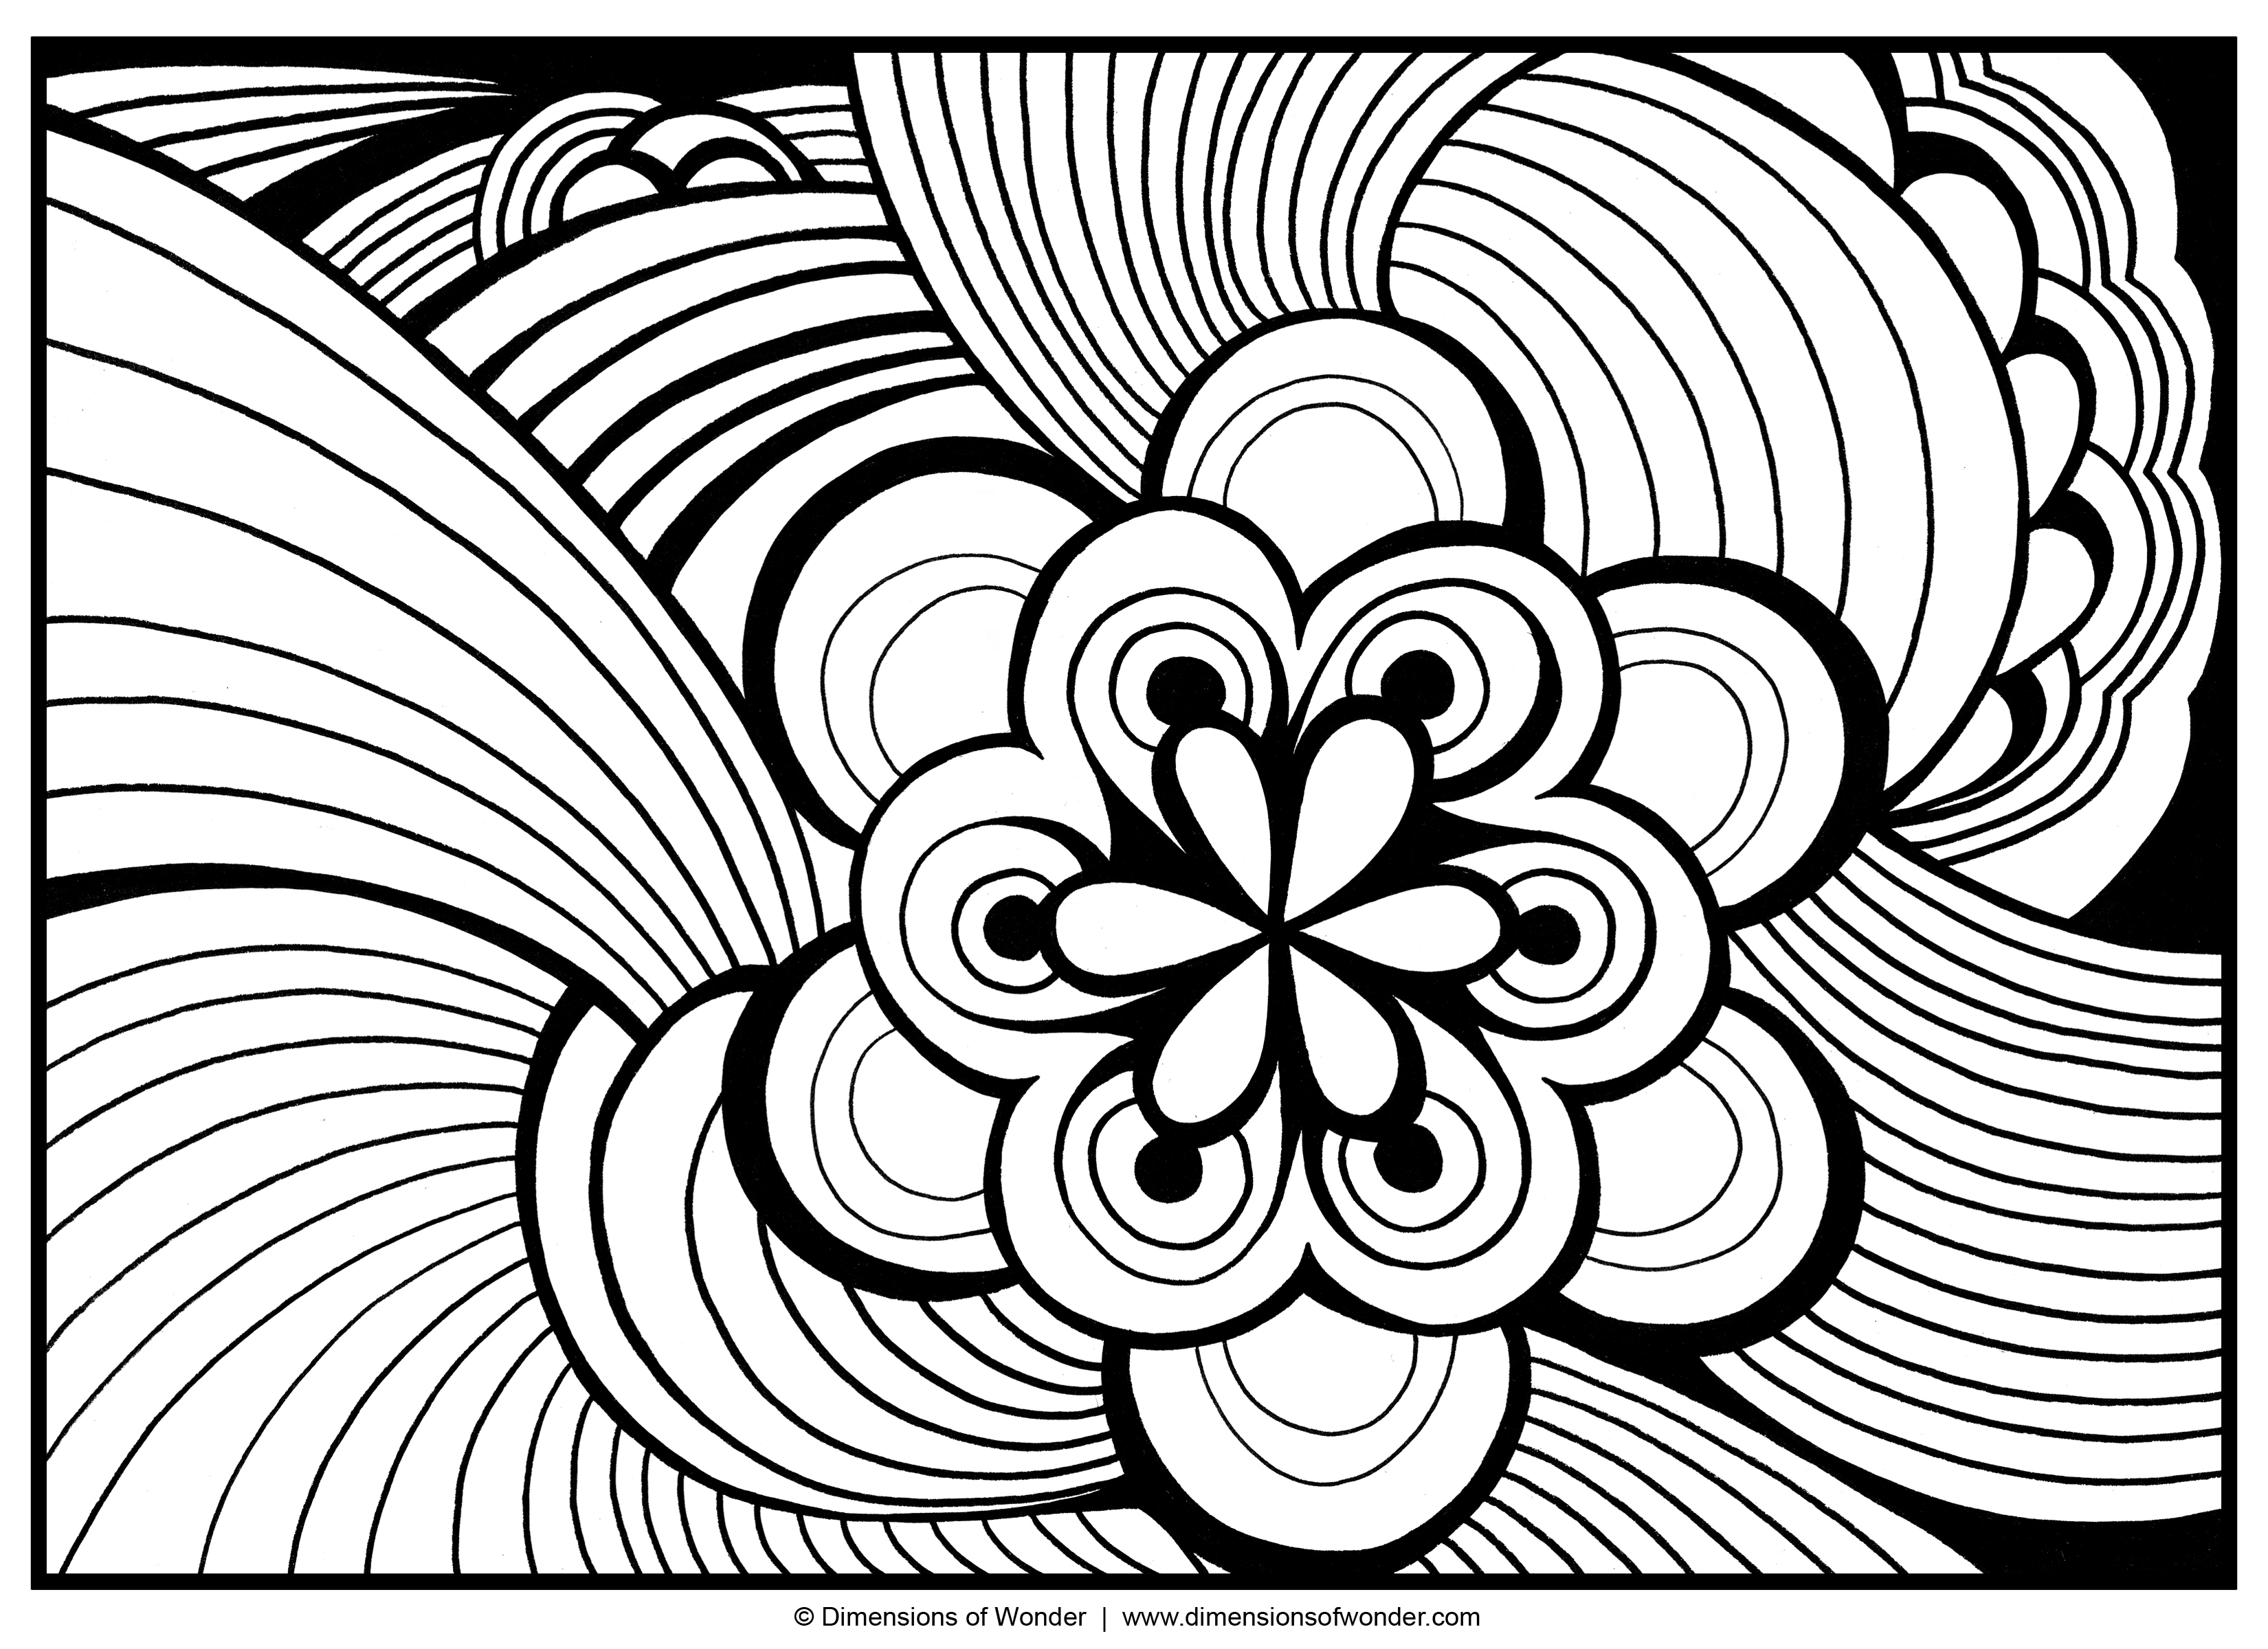 Art Coloring Pages For Adults Free Art Coloring Pages Download Free Clip Art Free Clip Art On